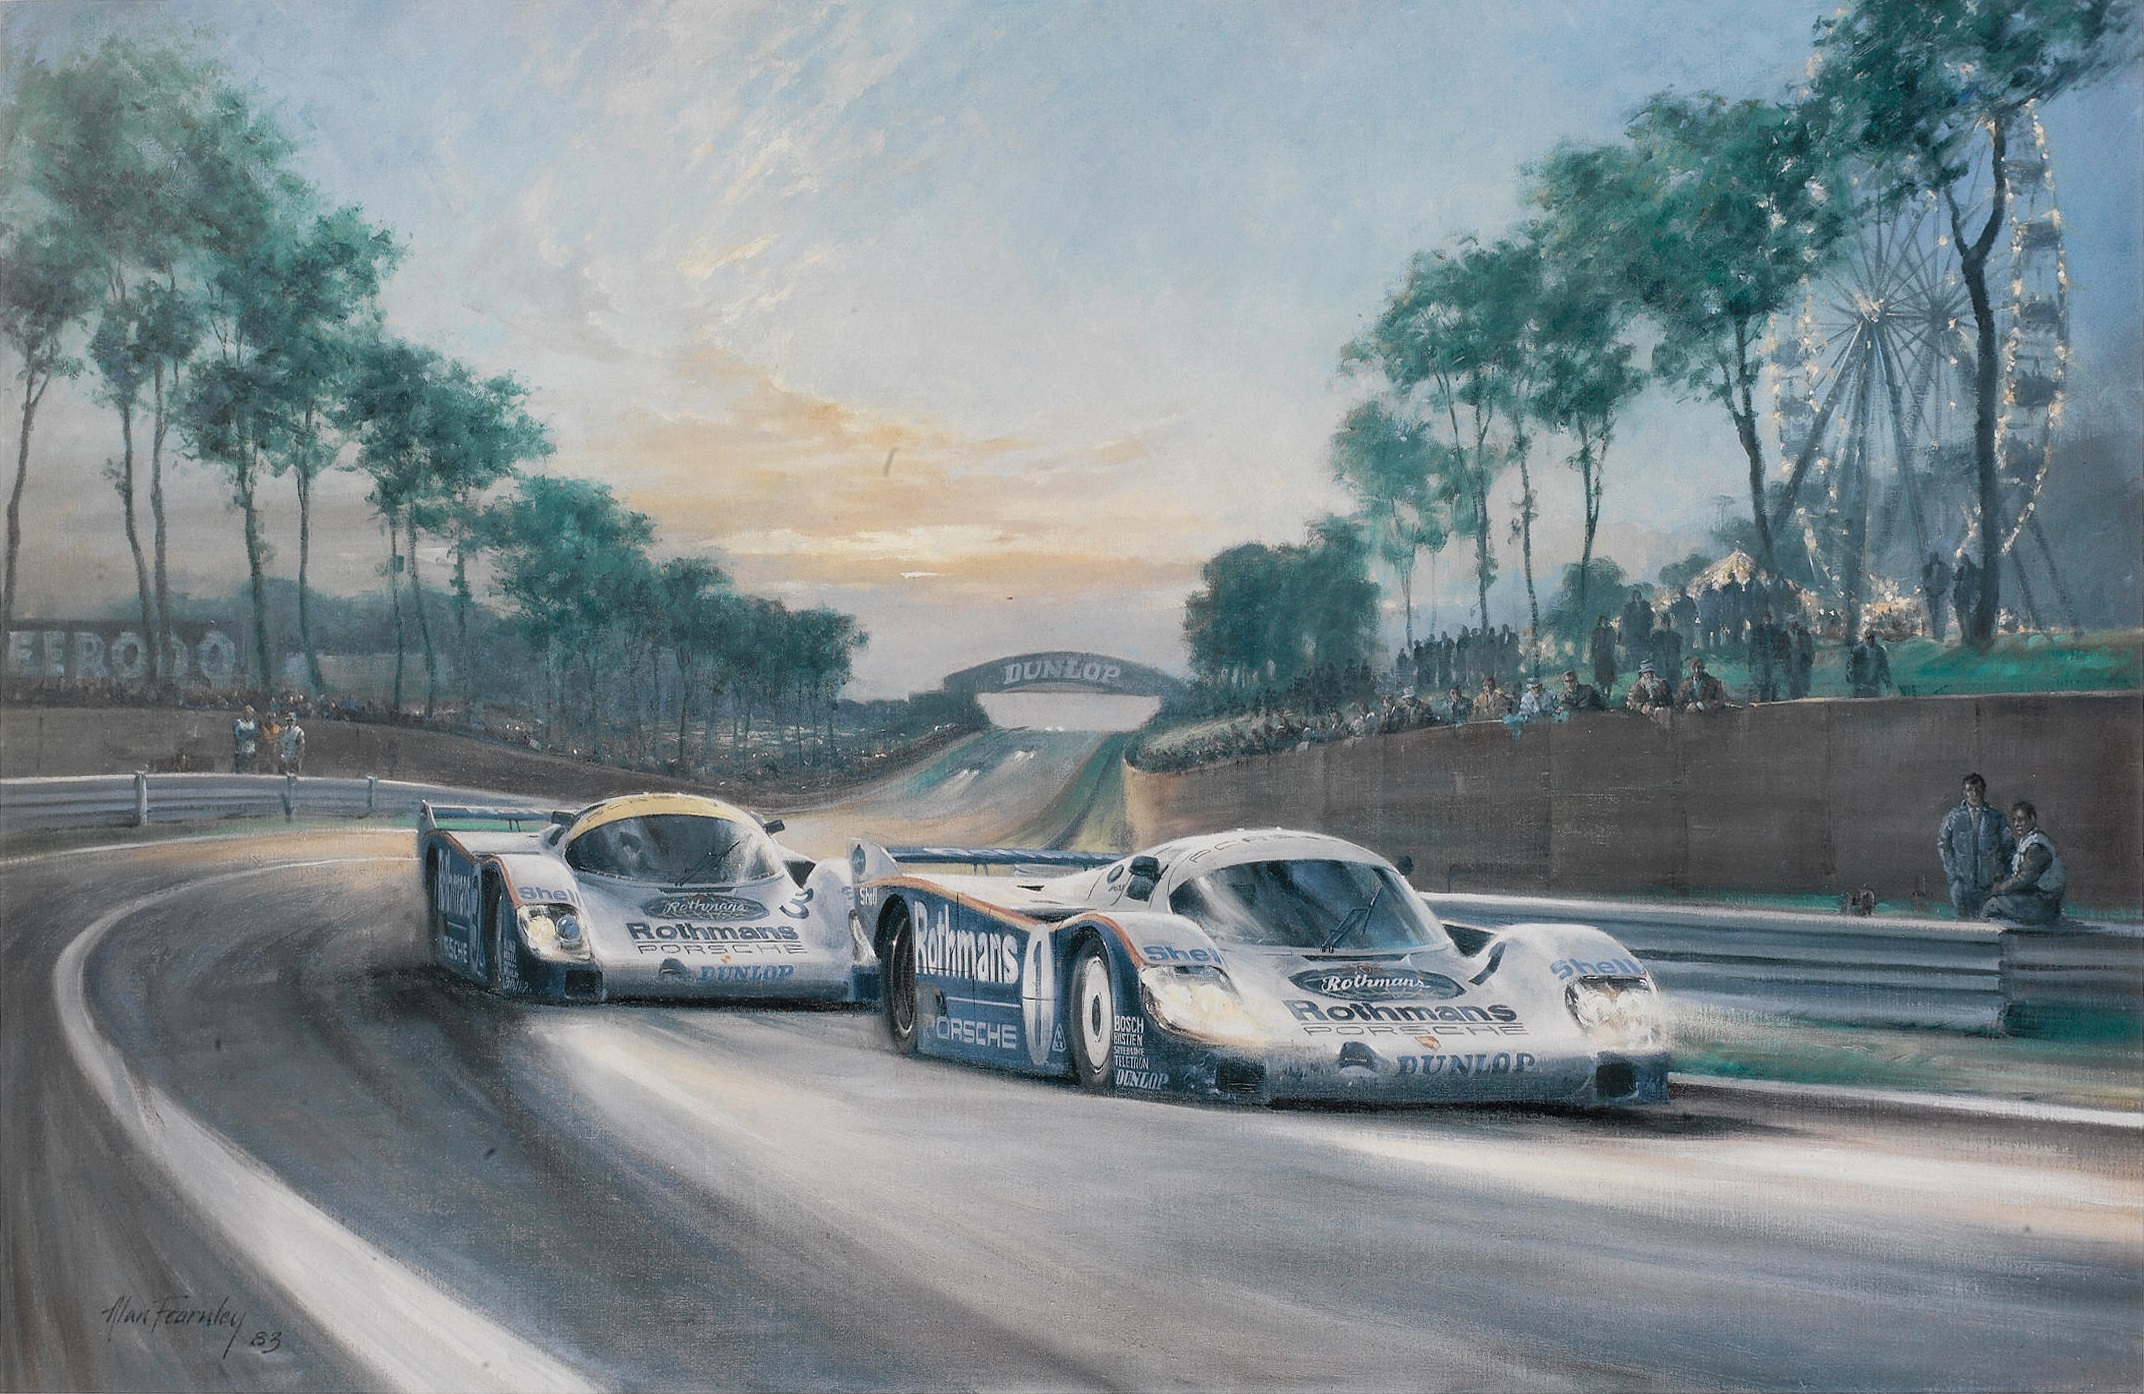 General 2144x1394 artwork oil painting Le Mans sunset Porsche 956 Jacky Ickx Al Holbert Alan Fearnley signature trees sky clouds frontal view road vehicle watermarked digital art